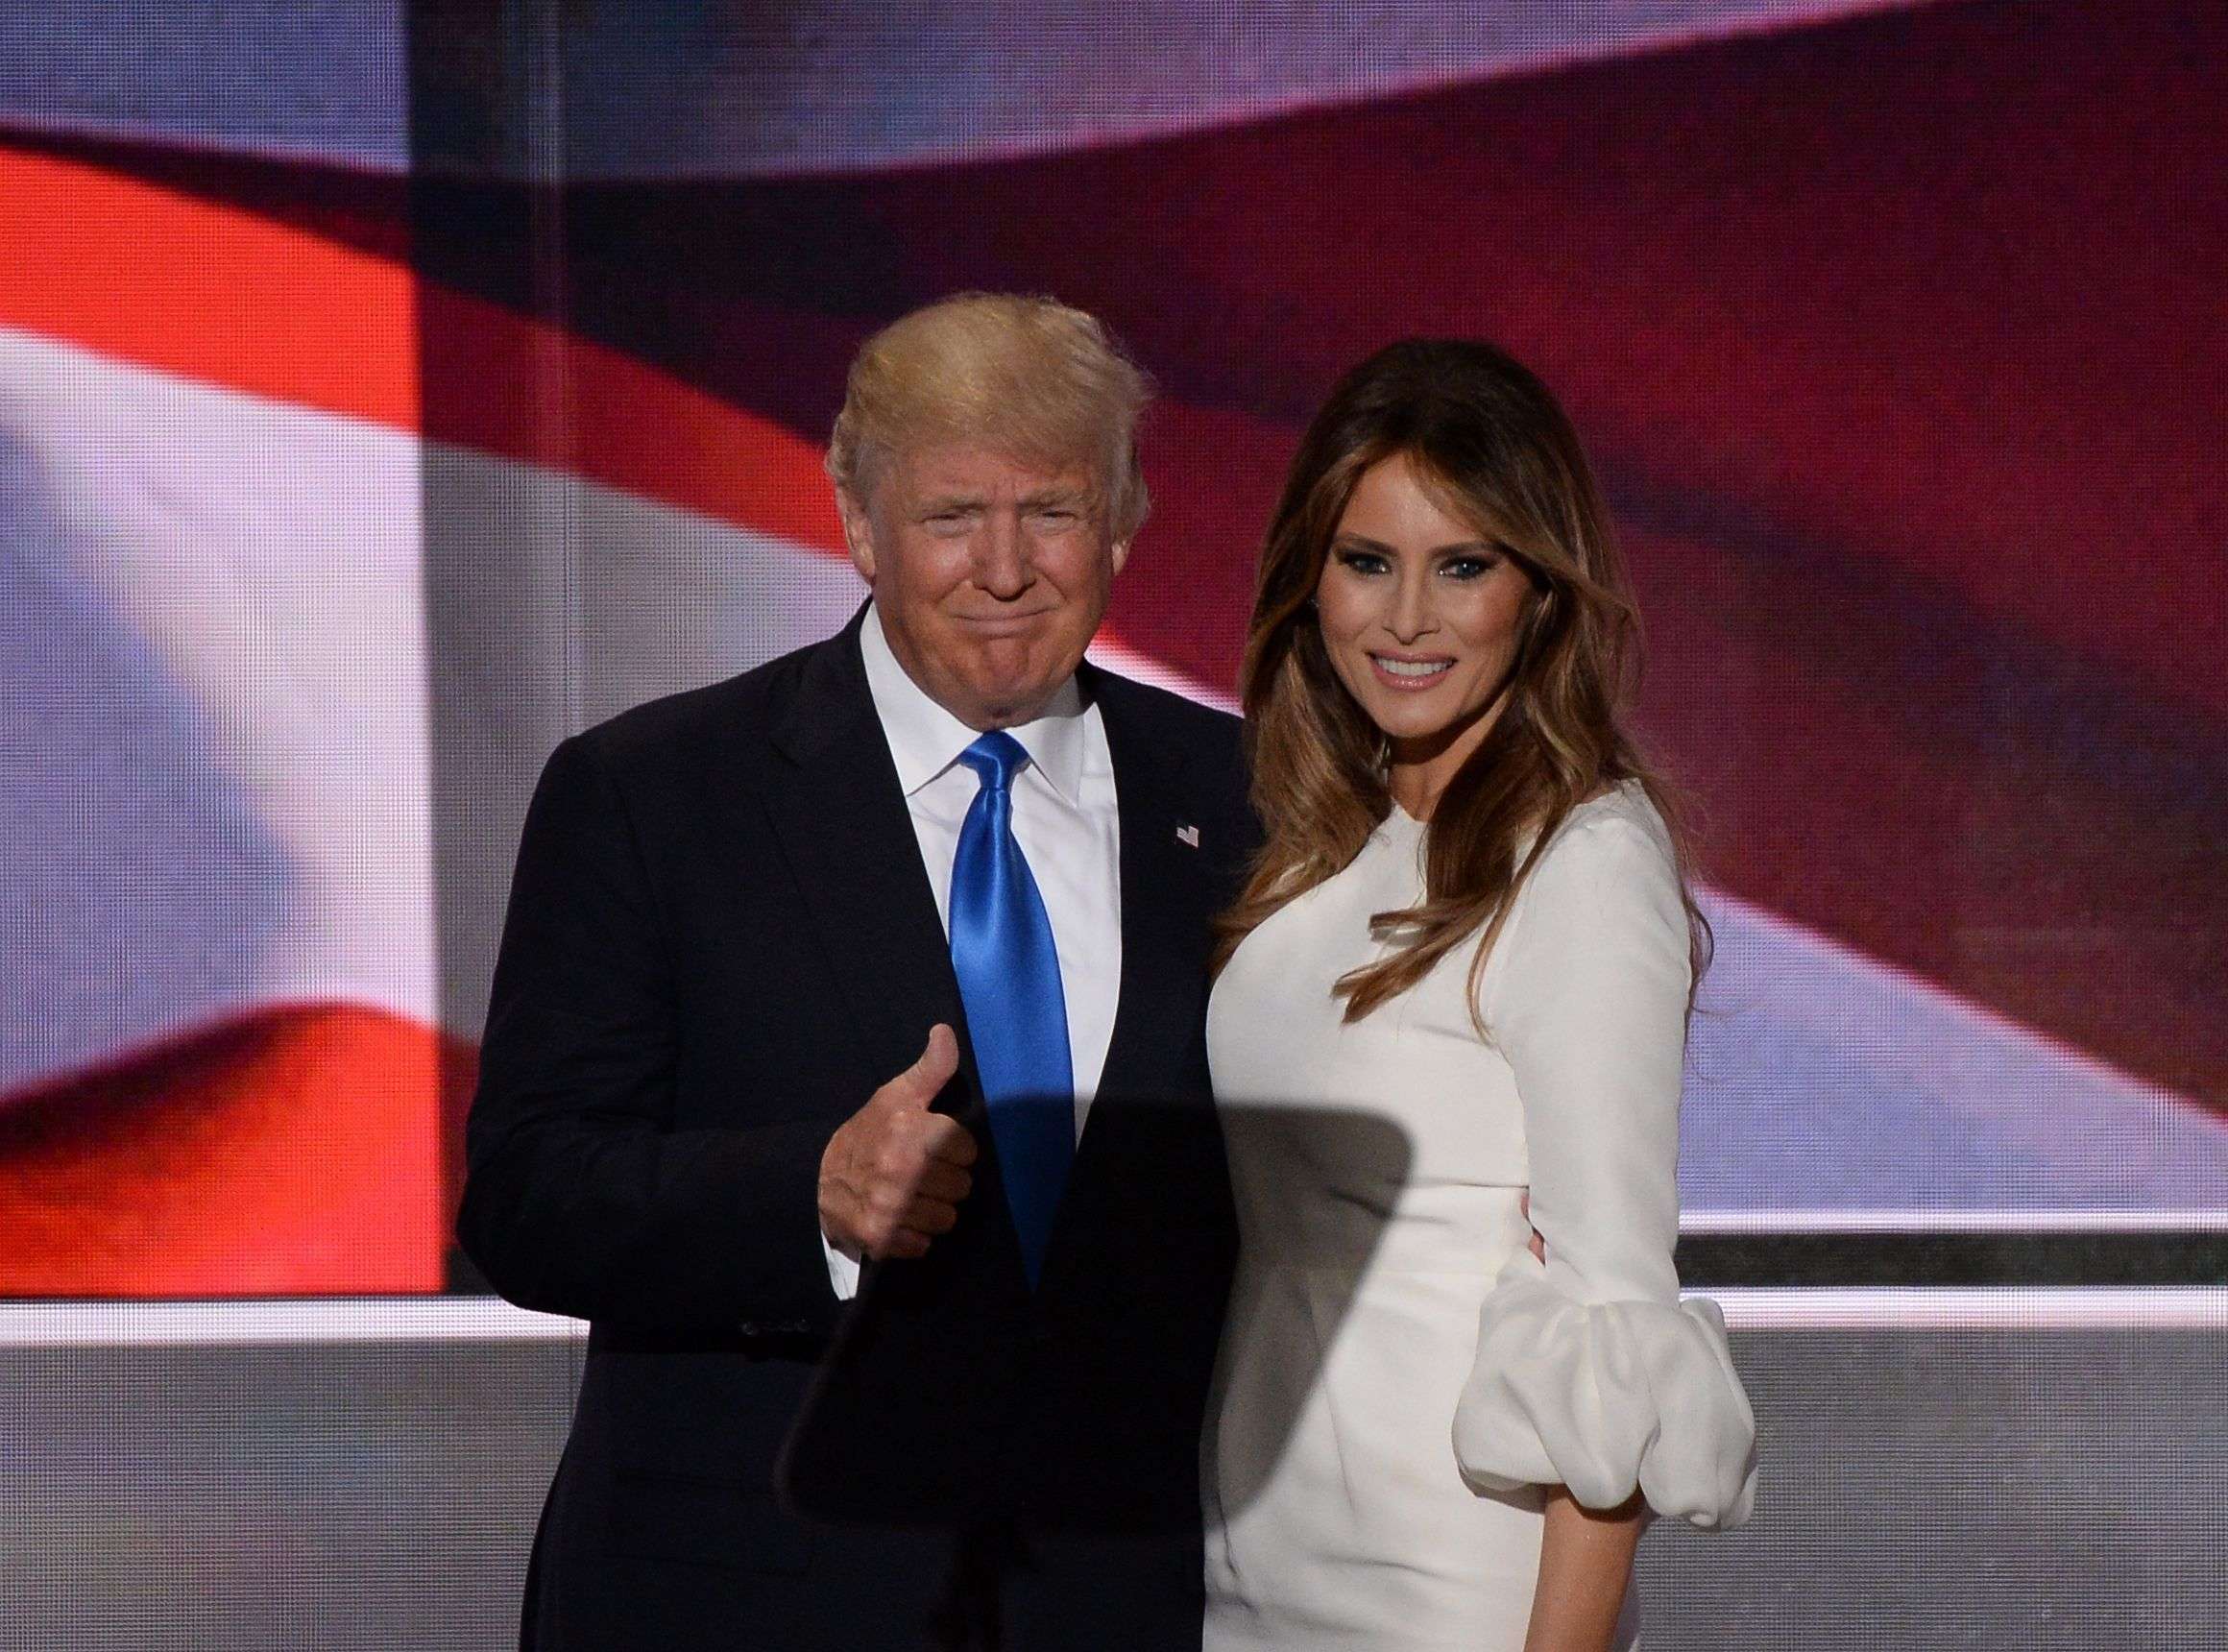 Melania Trump with the Donald: potential First Lady?